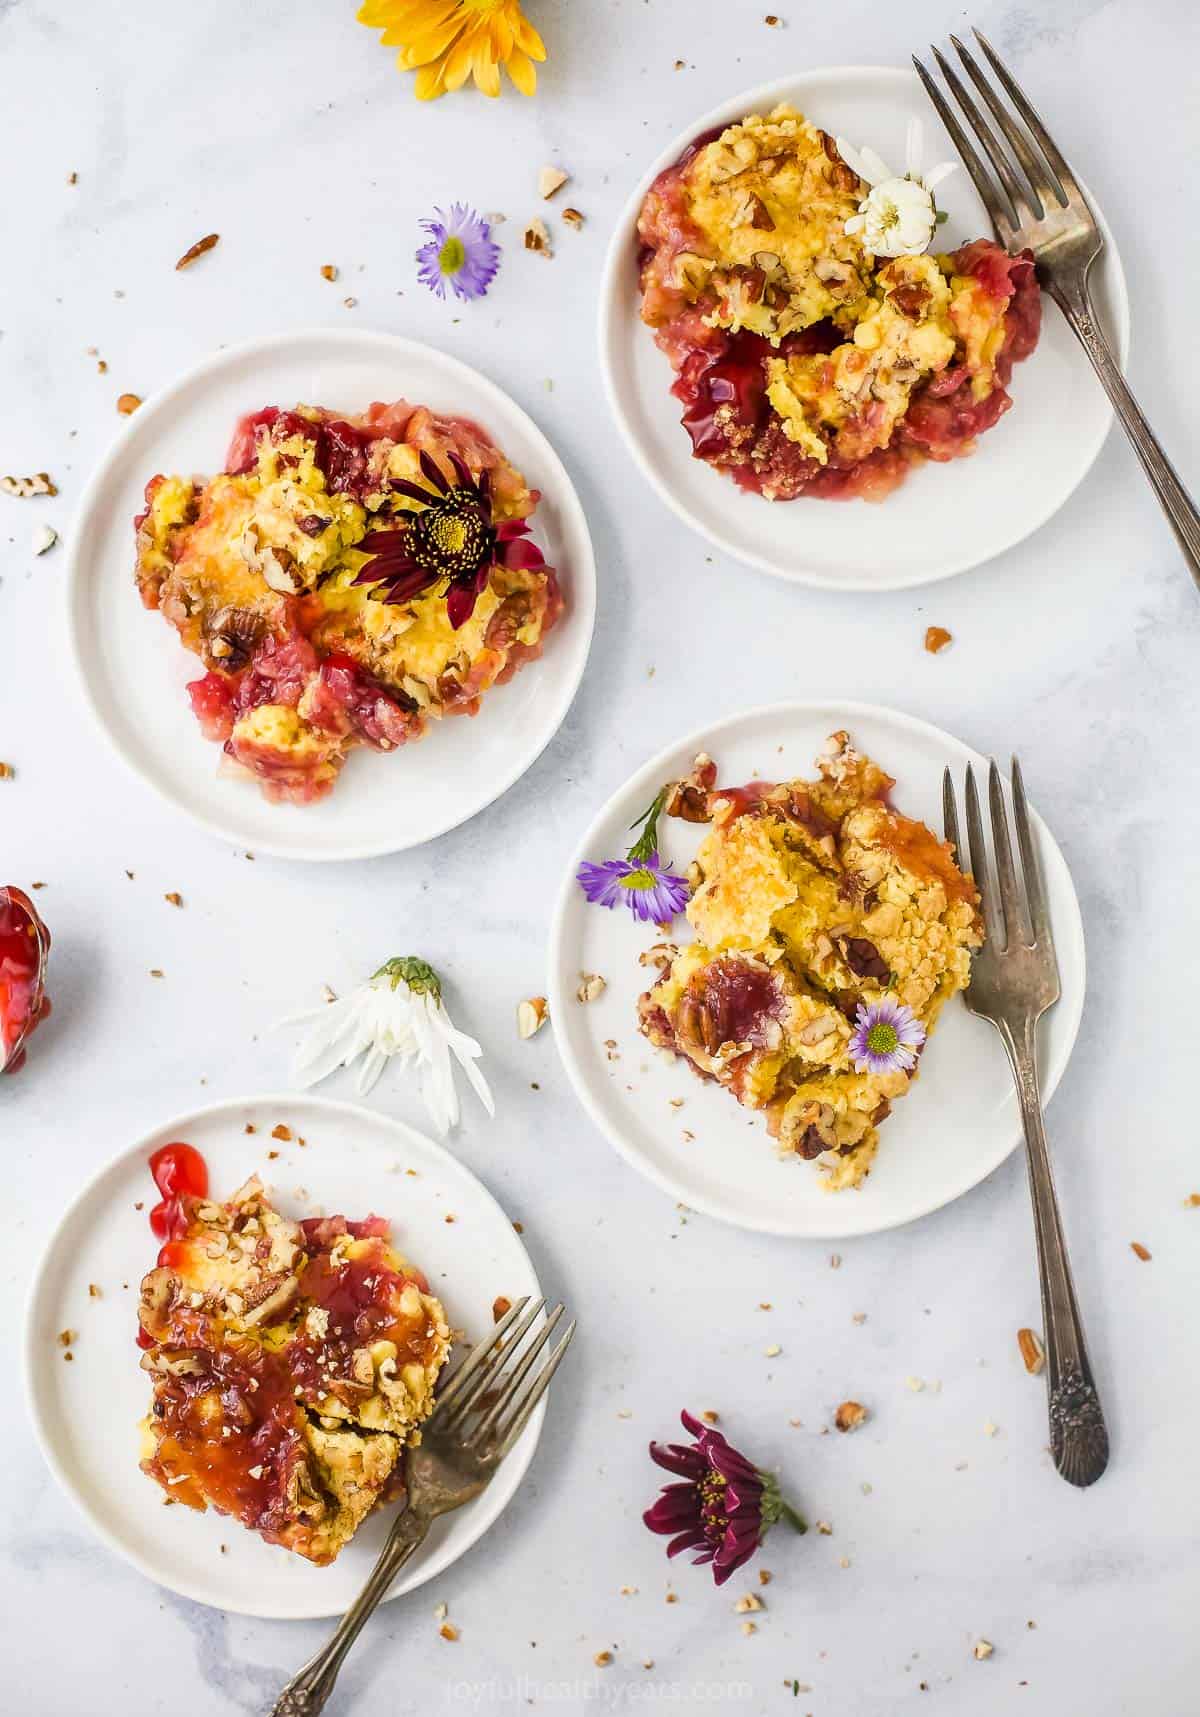 Four servings of Cherry Pineapple Dump Cake on plates with decorative wildflowers